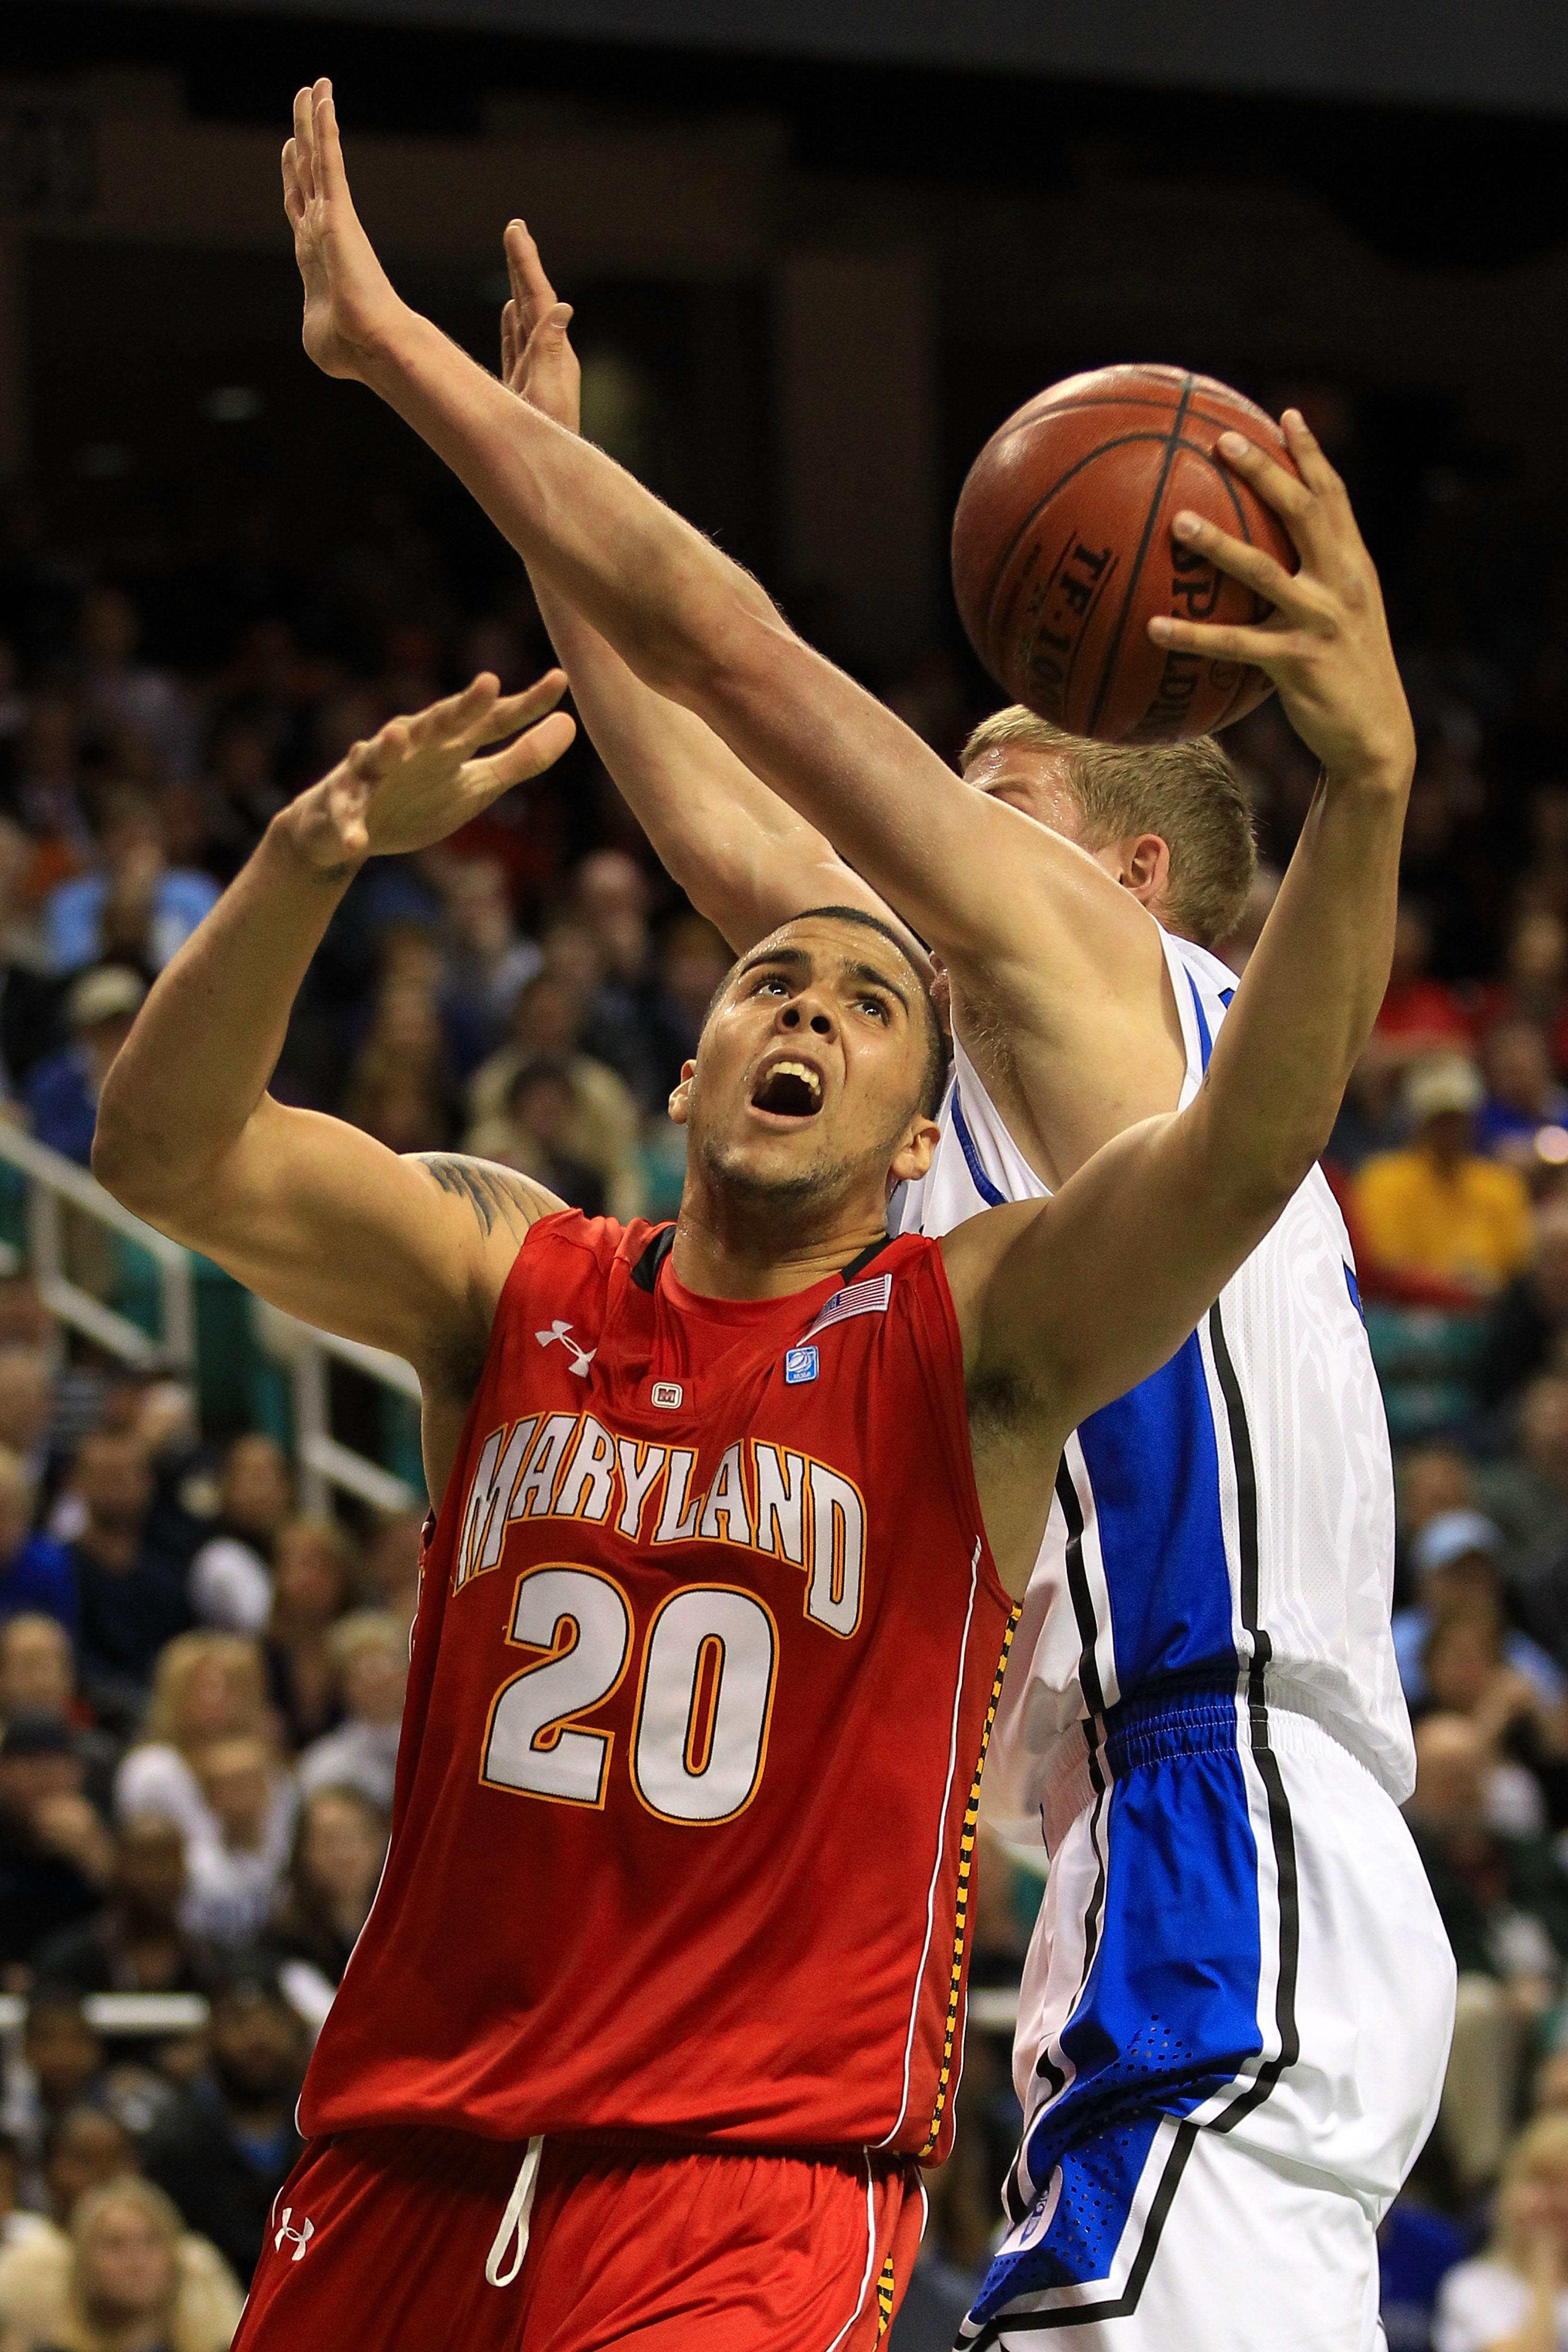 GREENSBORO, NC - MARCH 11:  Jordan Williams #20 of the Maryland Terrapins shoots against Mason Plumlee #5 of the Duke Blue Devils during the first half in the quarterfinals of the 2011 ACC men's basketball tournament at the Greensboro Coliseum on March 11